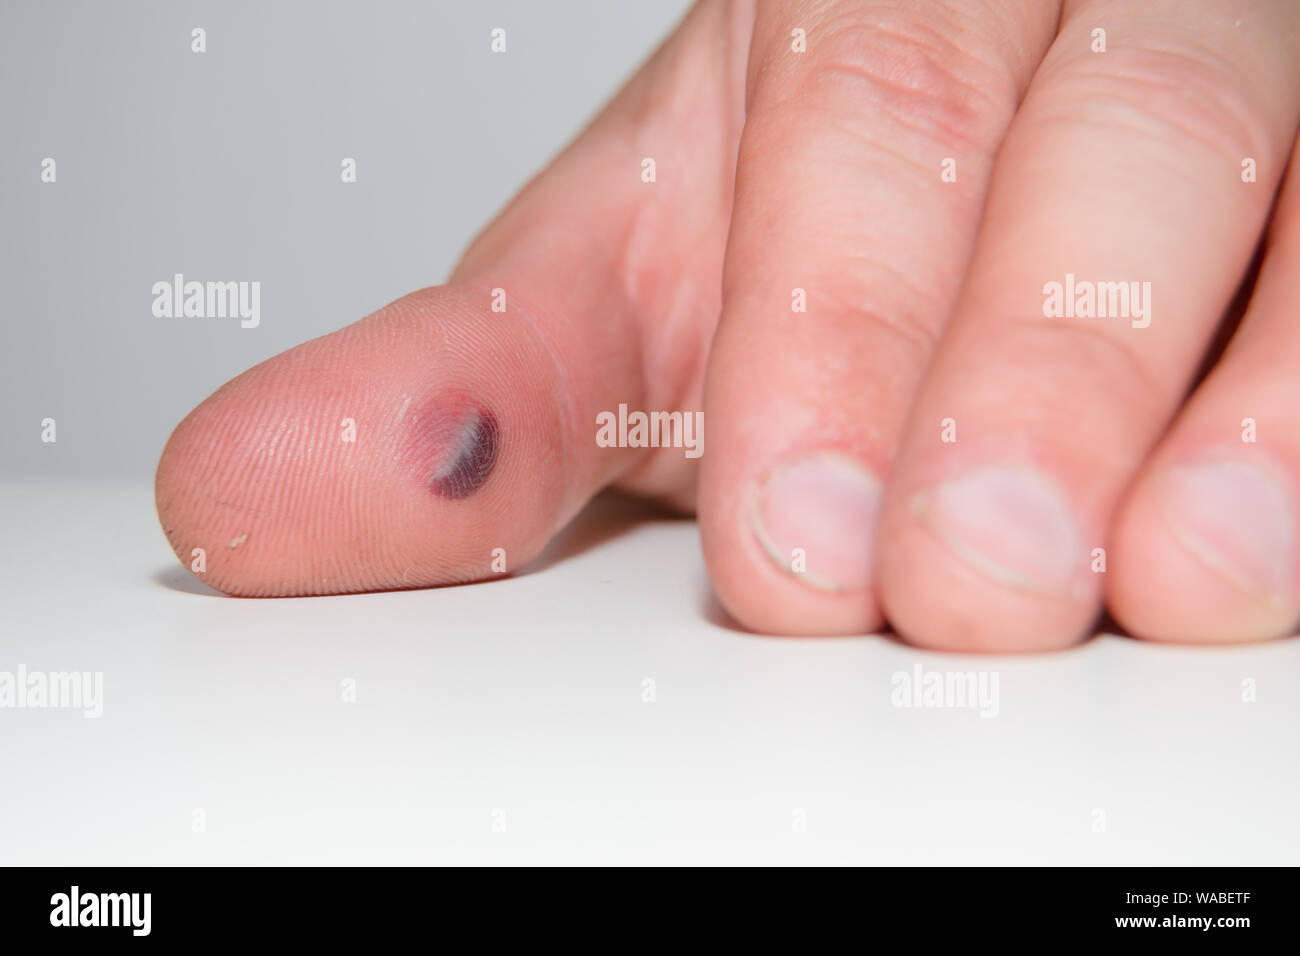 Blood blister under the thumb skin. Caucasian young man finger on white background Stock Photo